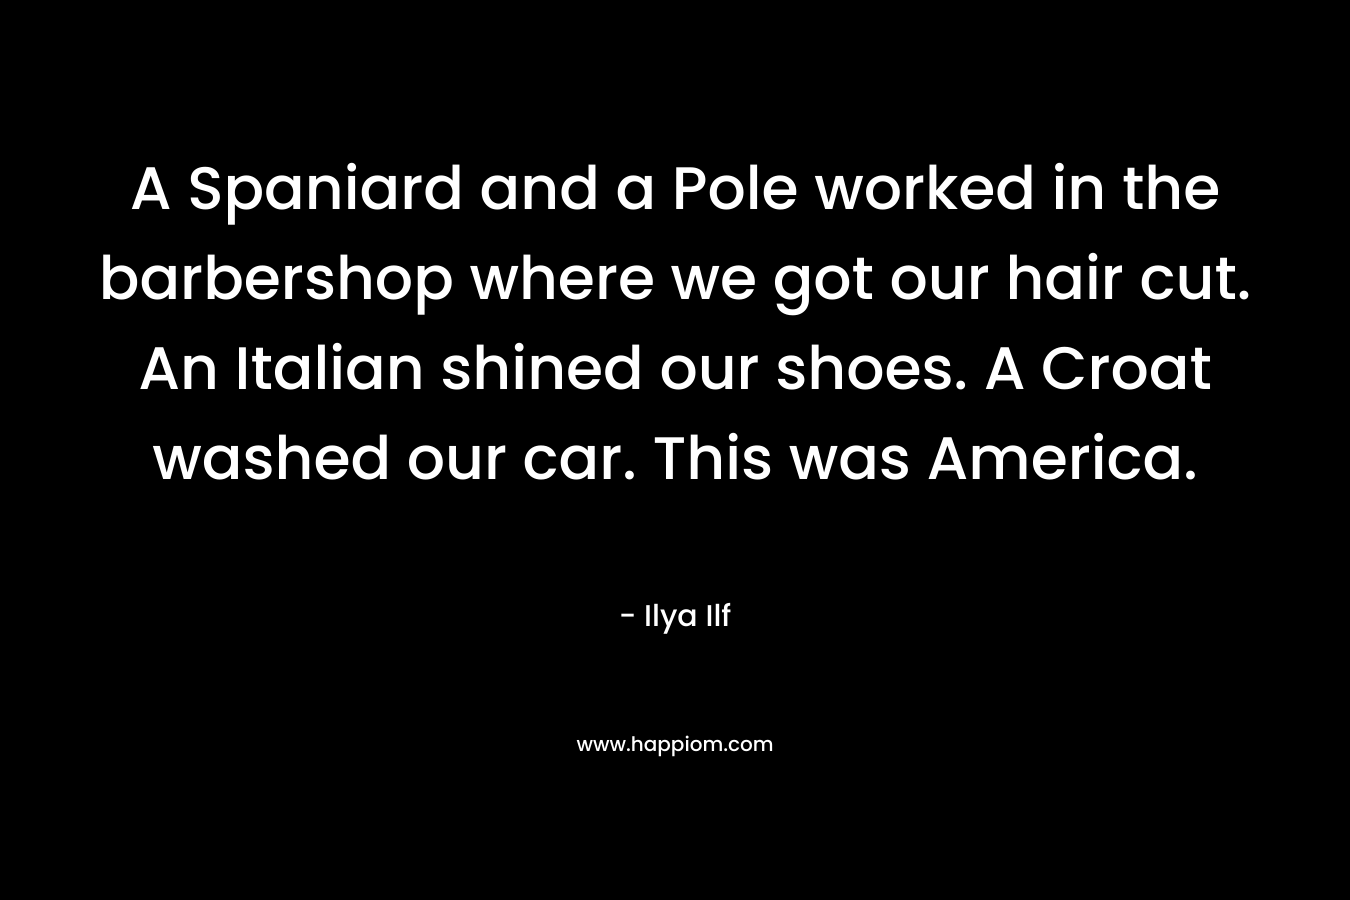 A Spaniard and a Pole worked in the barbershop where we got our hair cut. An Italian shined our shoes. A Croat washed our car. This was America. – Ilya Ilf